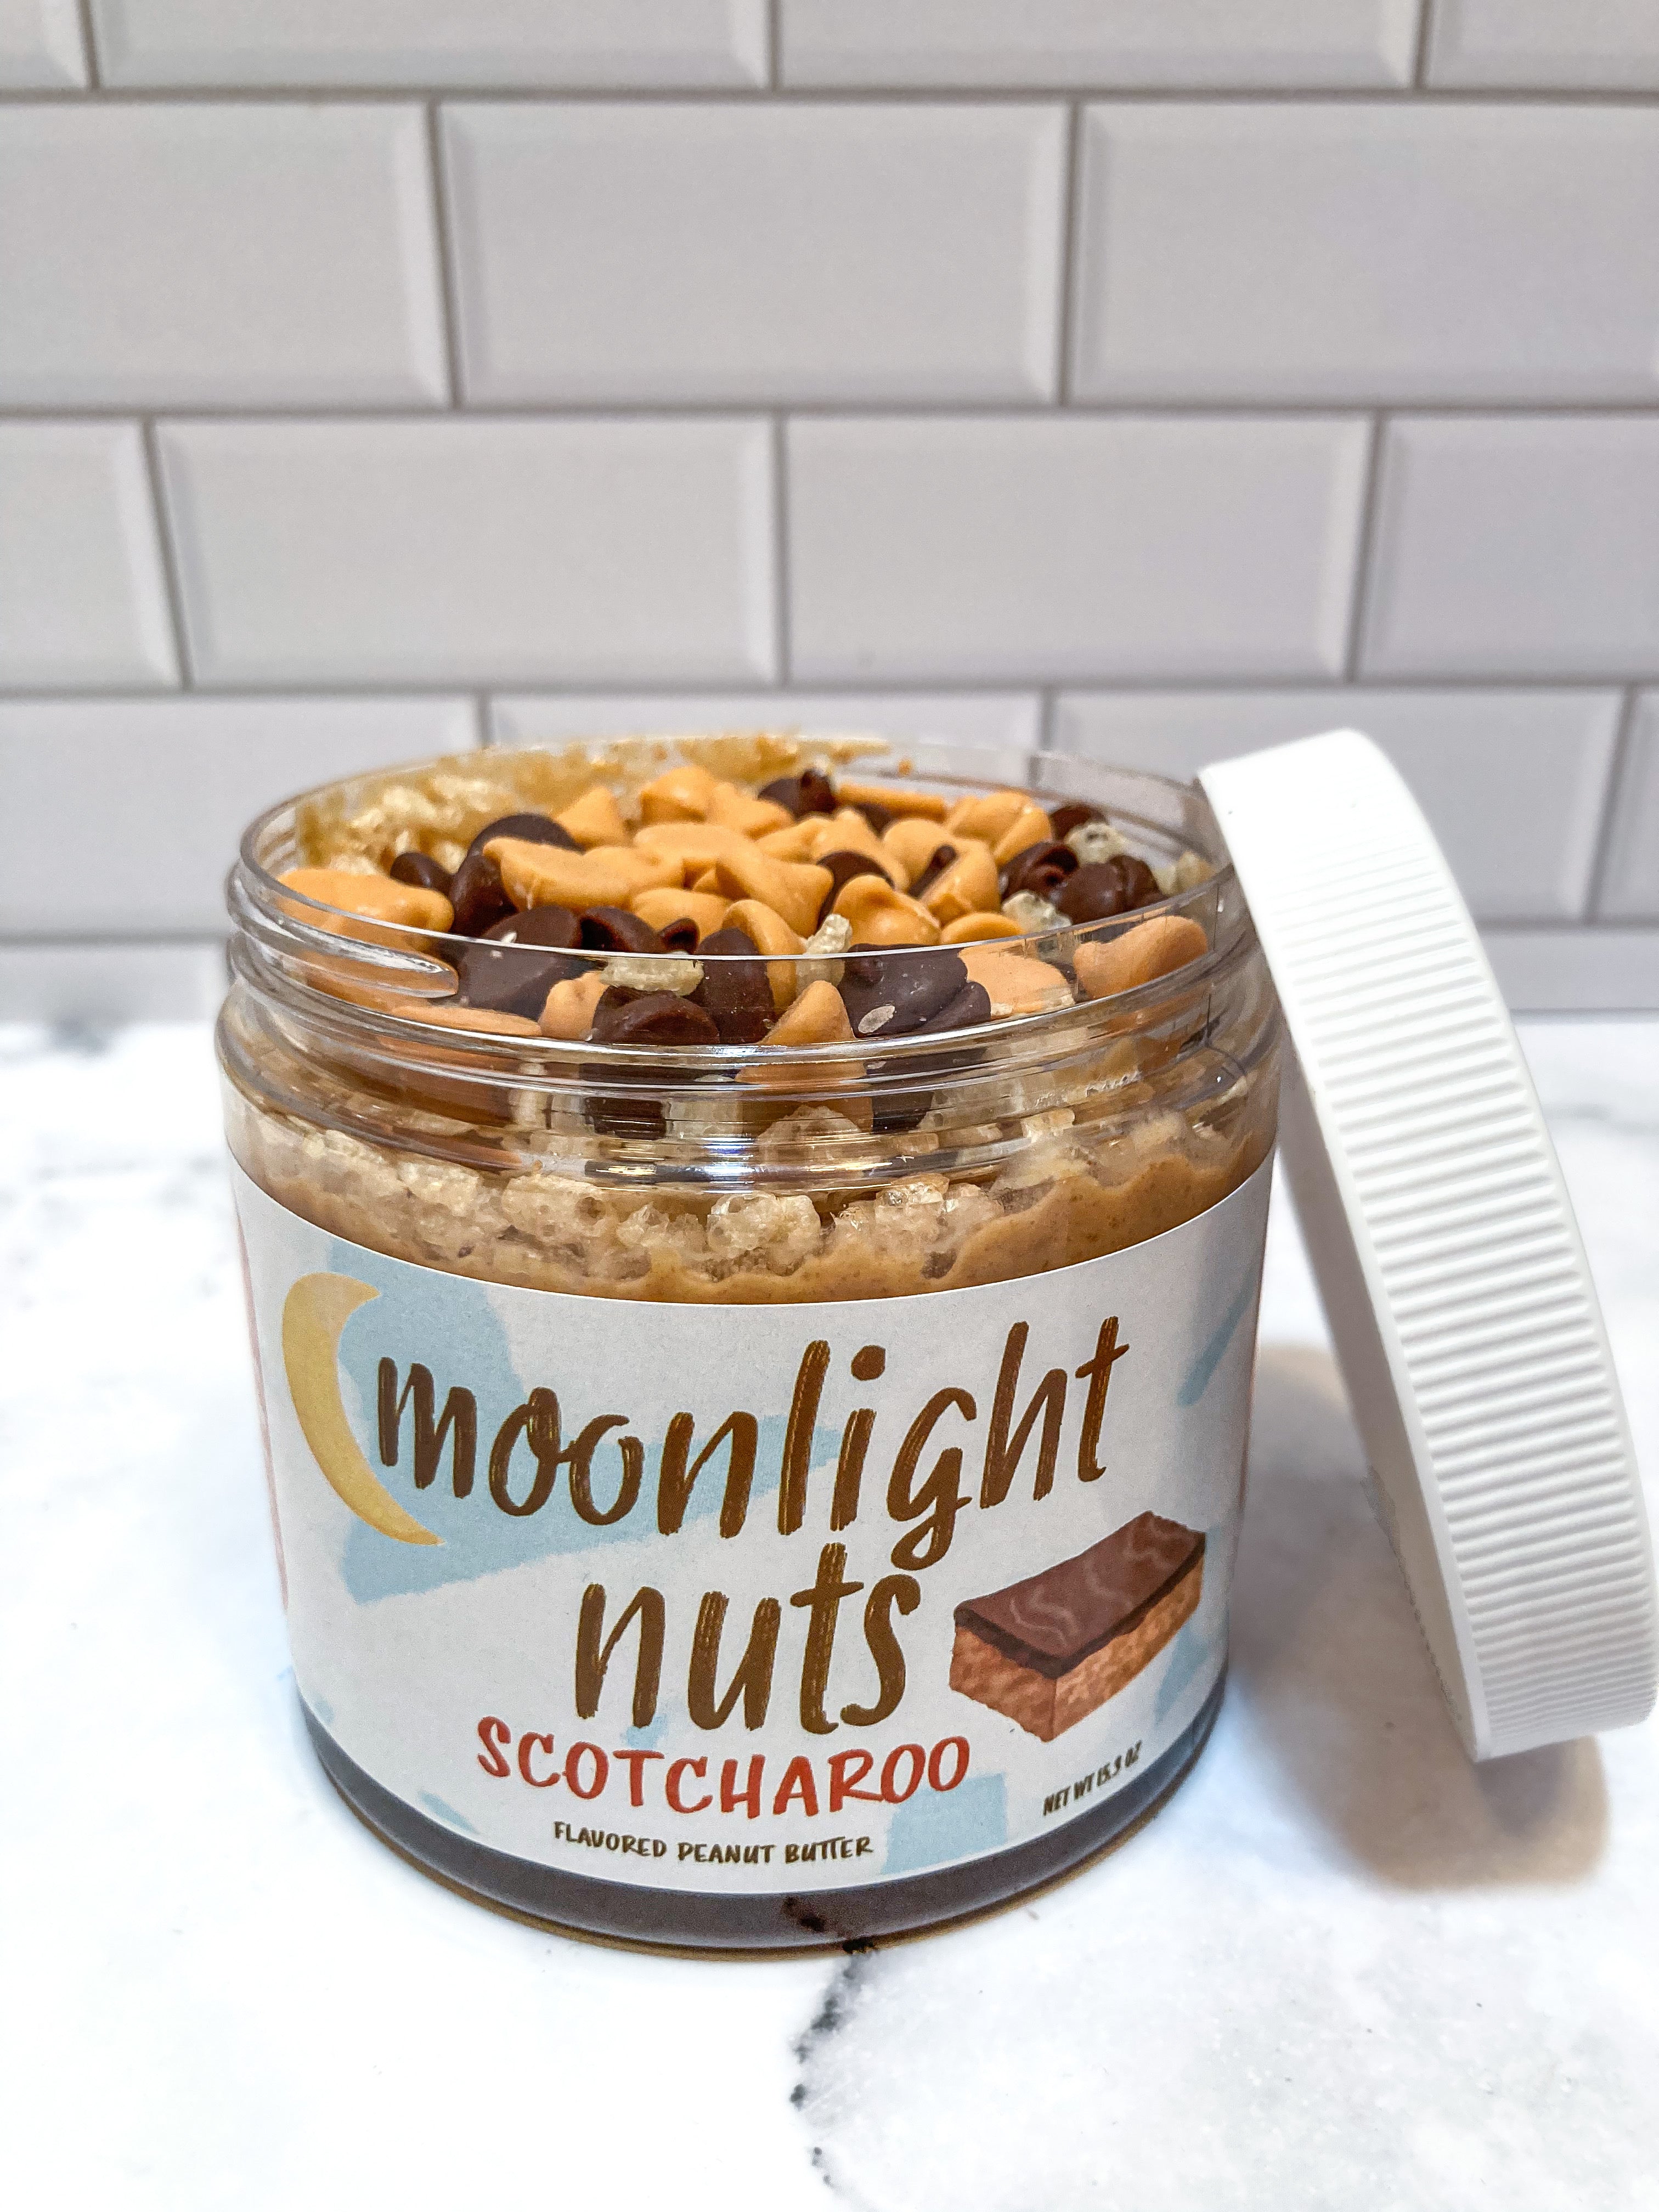 Scotcharoo - Flavored Peanut Butter